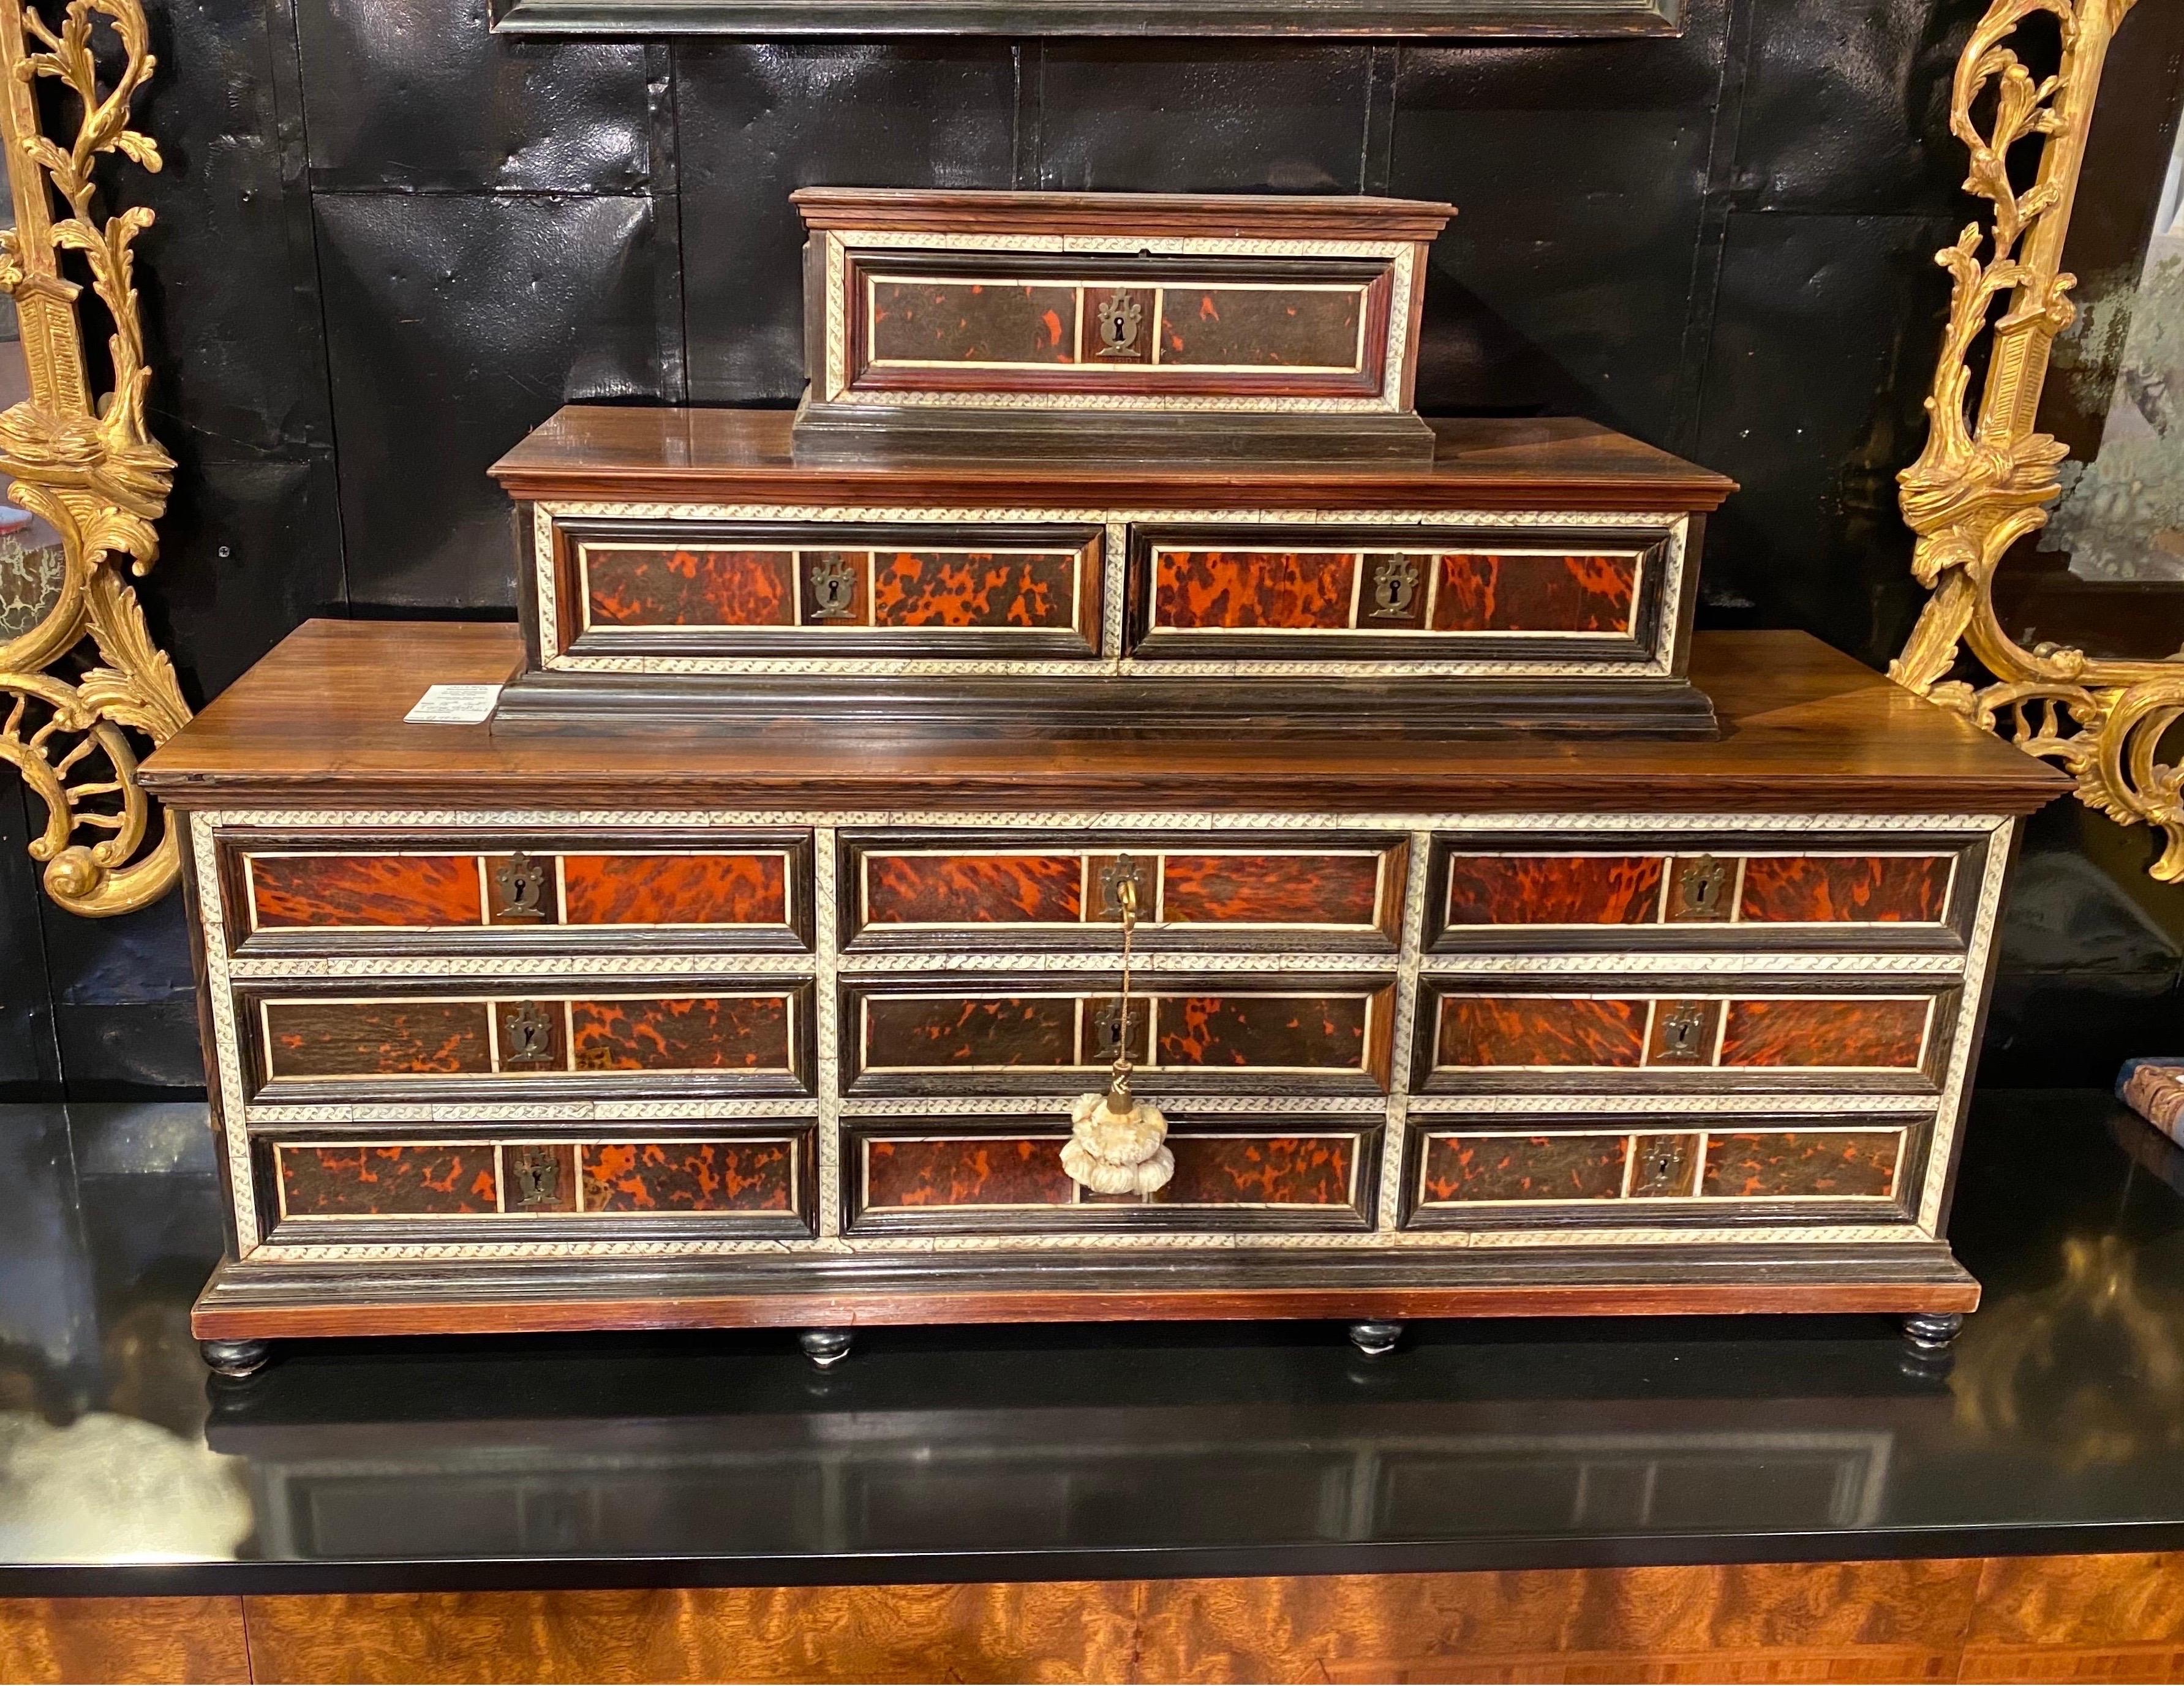 Early 18th century Spanish vargueno from the McNair family collection. Very good quality and detail, this collectors cabinet is made of rosewood, tortoise shell, and bone and was photographed in the McNair’s Dallas home and published in